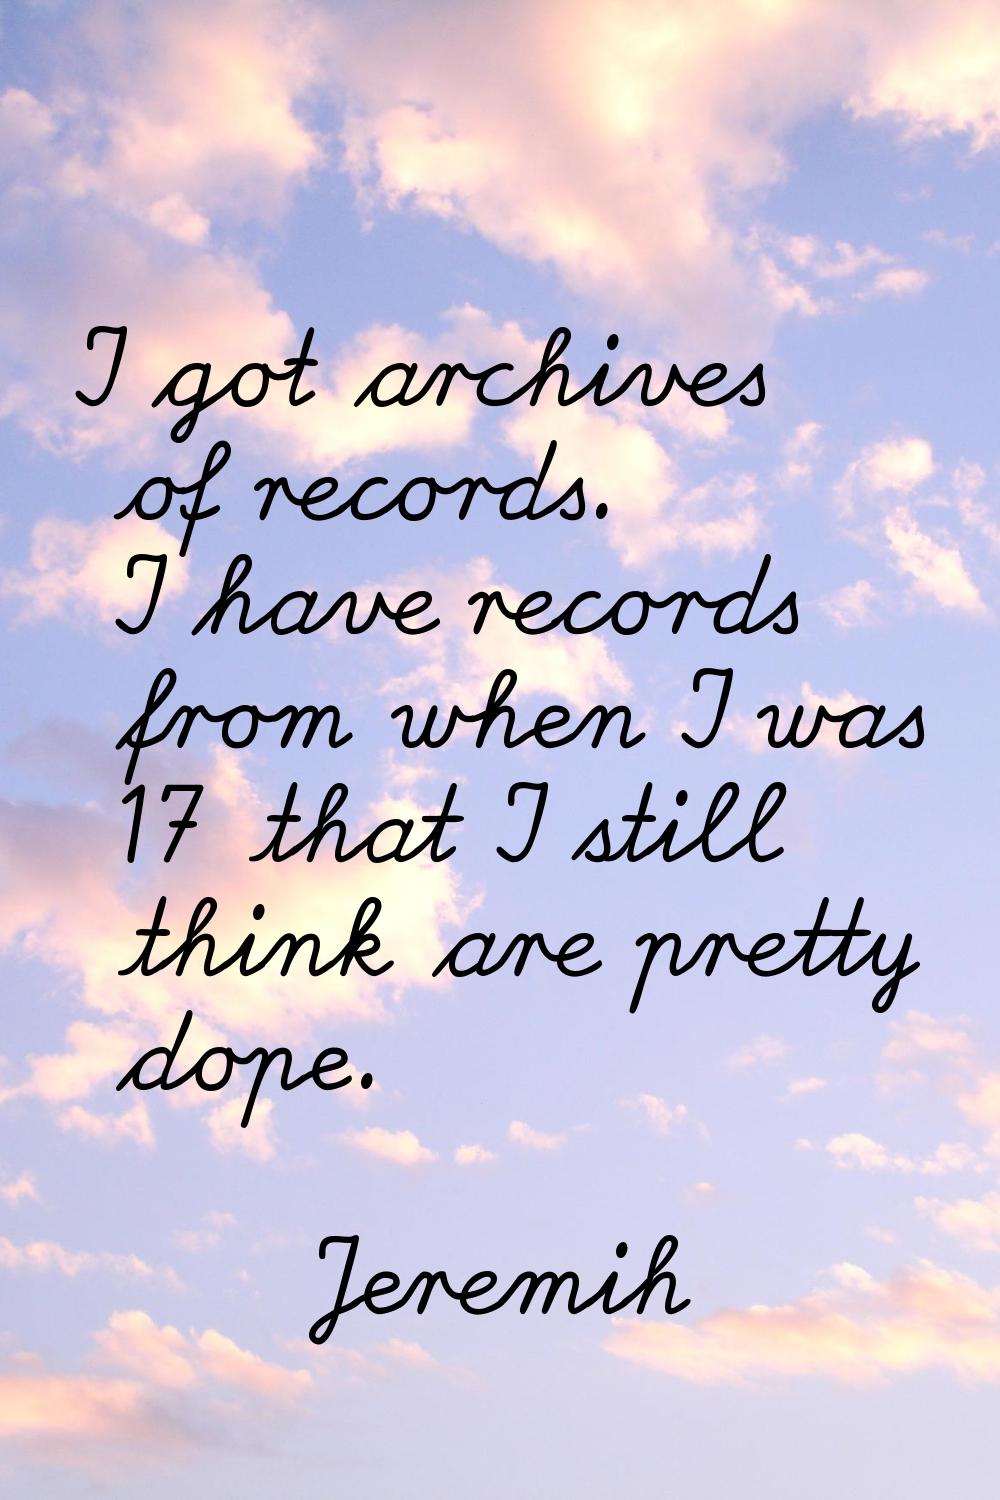 I got archives of records. I have records from when I was 17 that I still think are pretty dope.